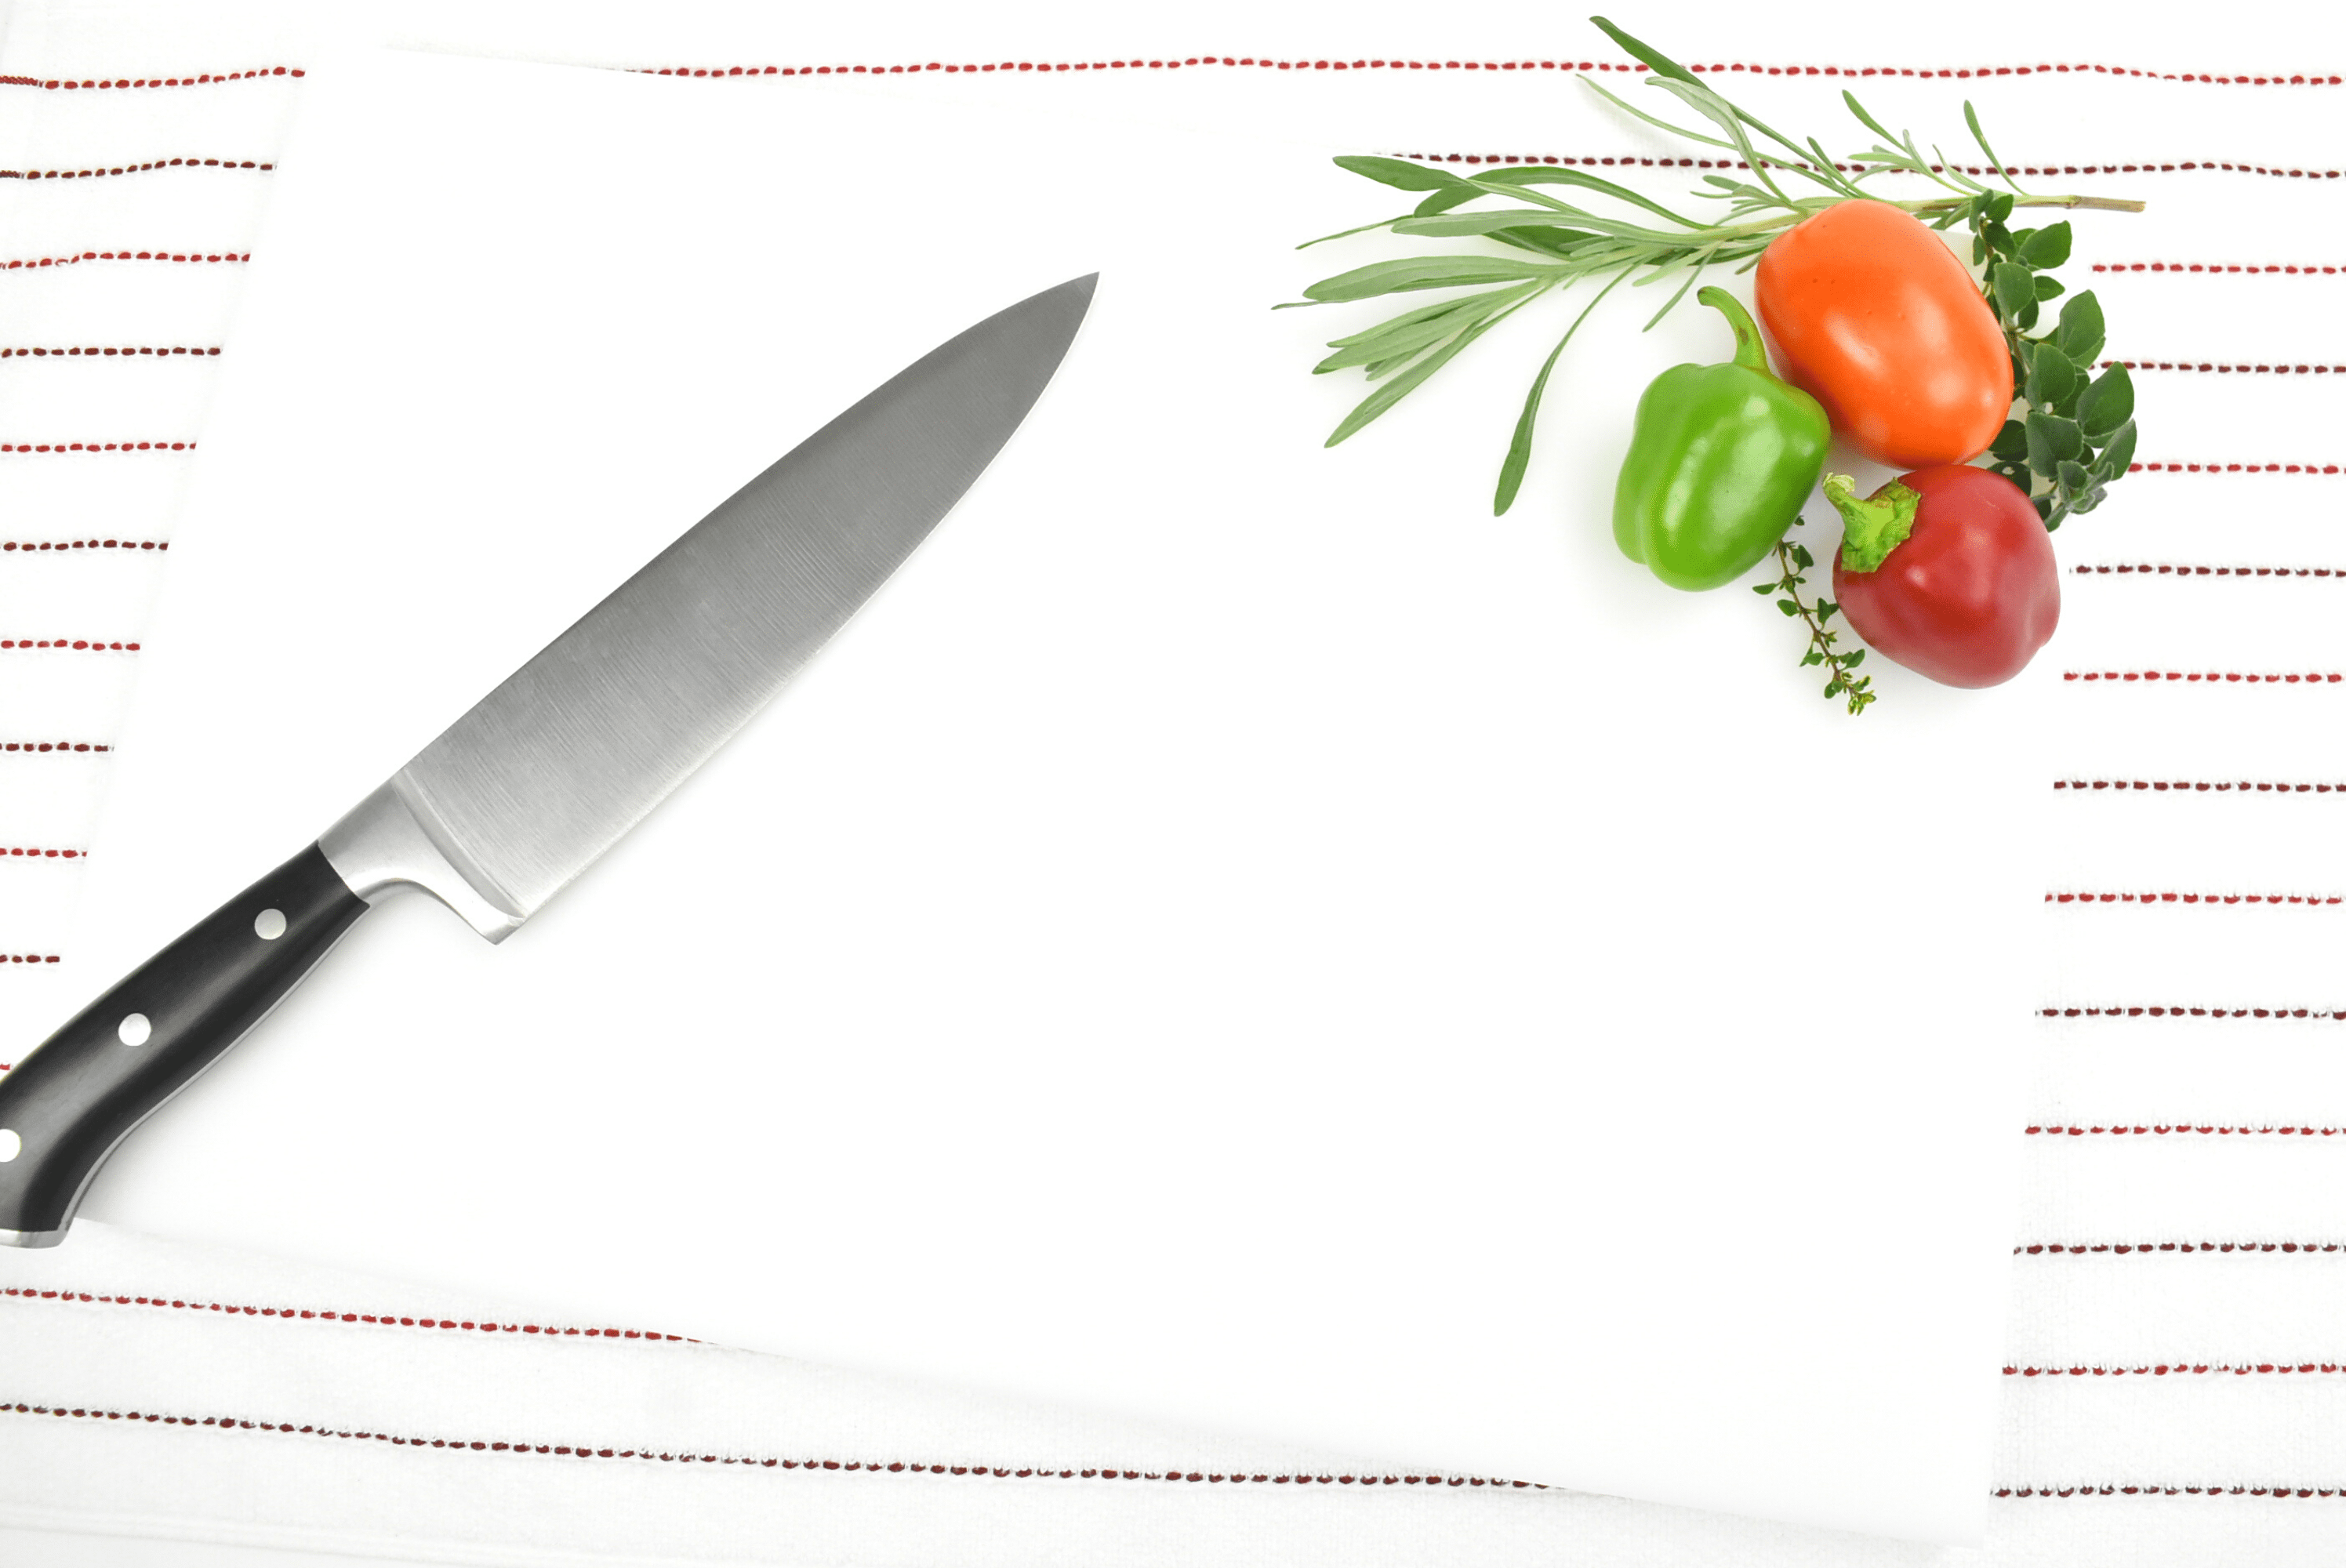  1/4 White Poly Cutting Board - A Cut Above the Rest!